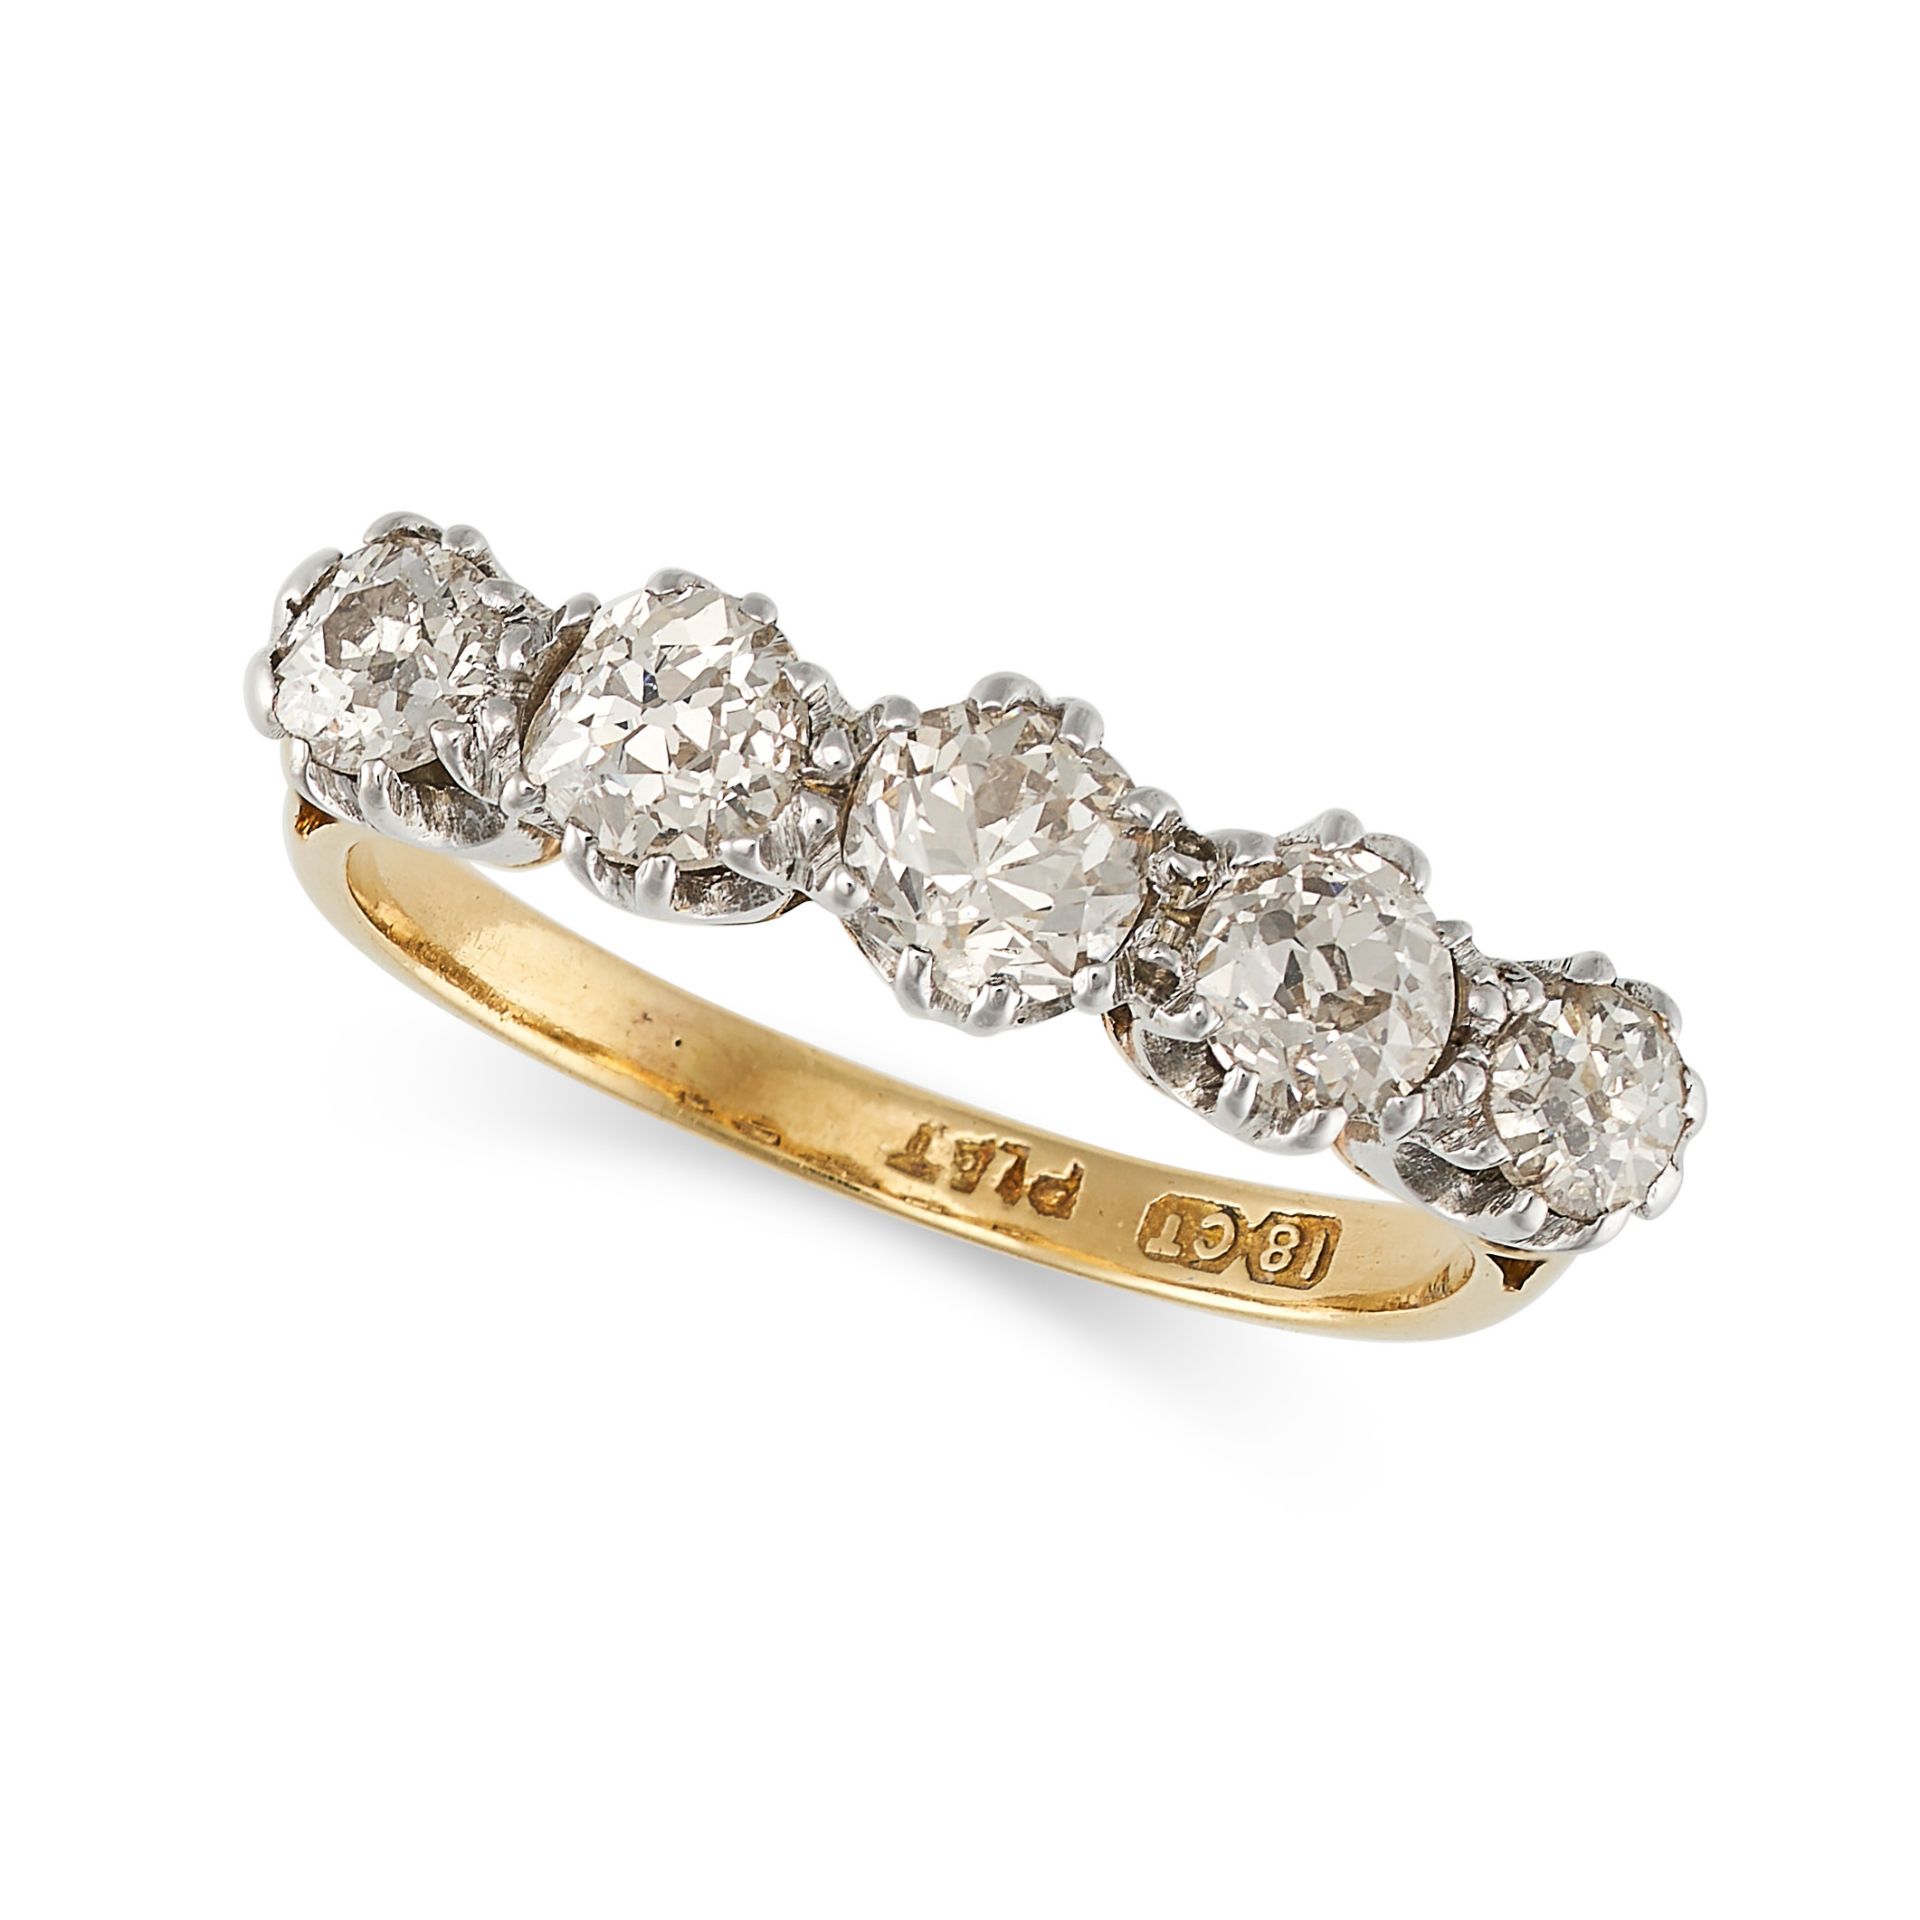 NO RESERVE - AN ANTIQUE DIAMOND FIVE STONE RING, EARLY 20TH CENTURY in 18ct yellow gold and plati...